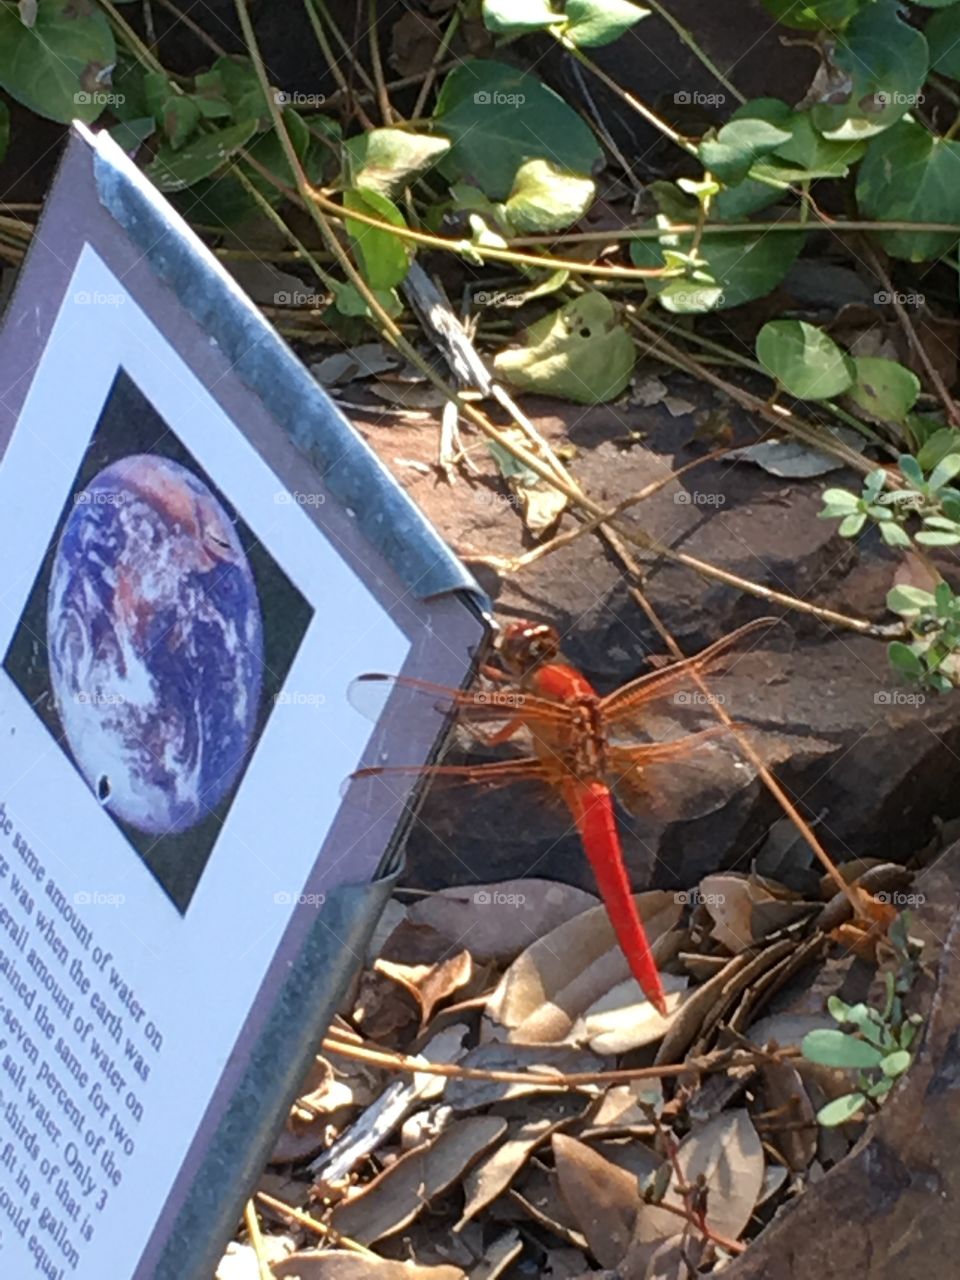 Large red-orange dragonfly perched on a sign in an outdoor artistic pond at University of North Texas